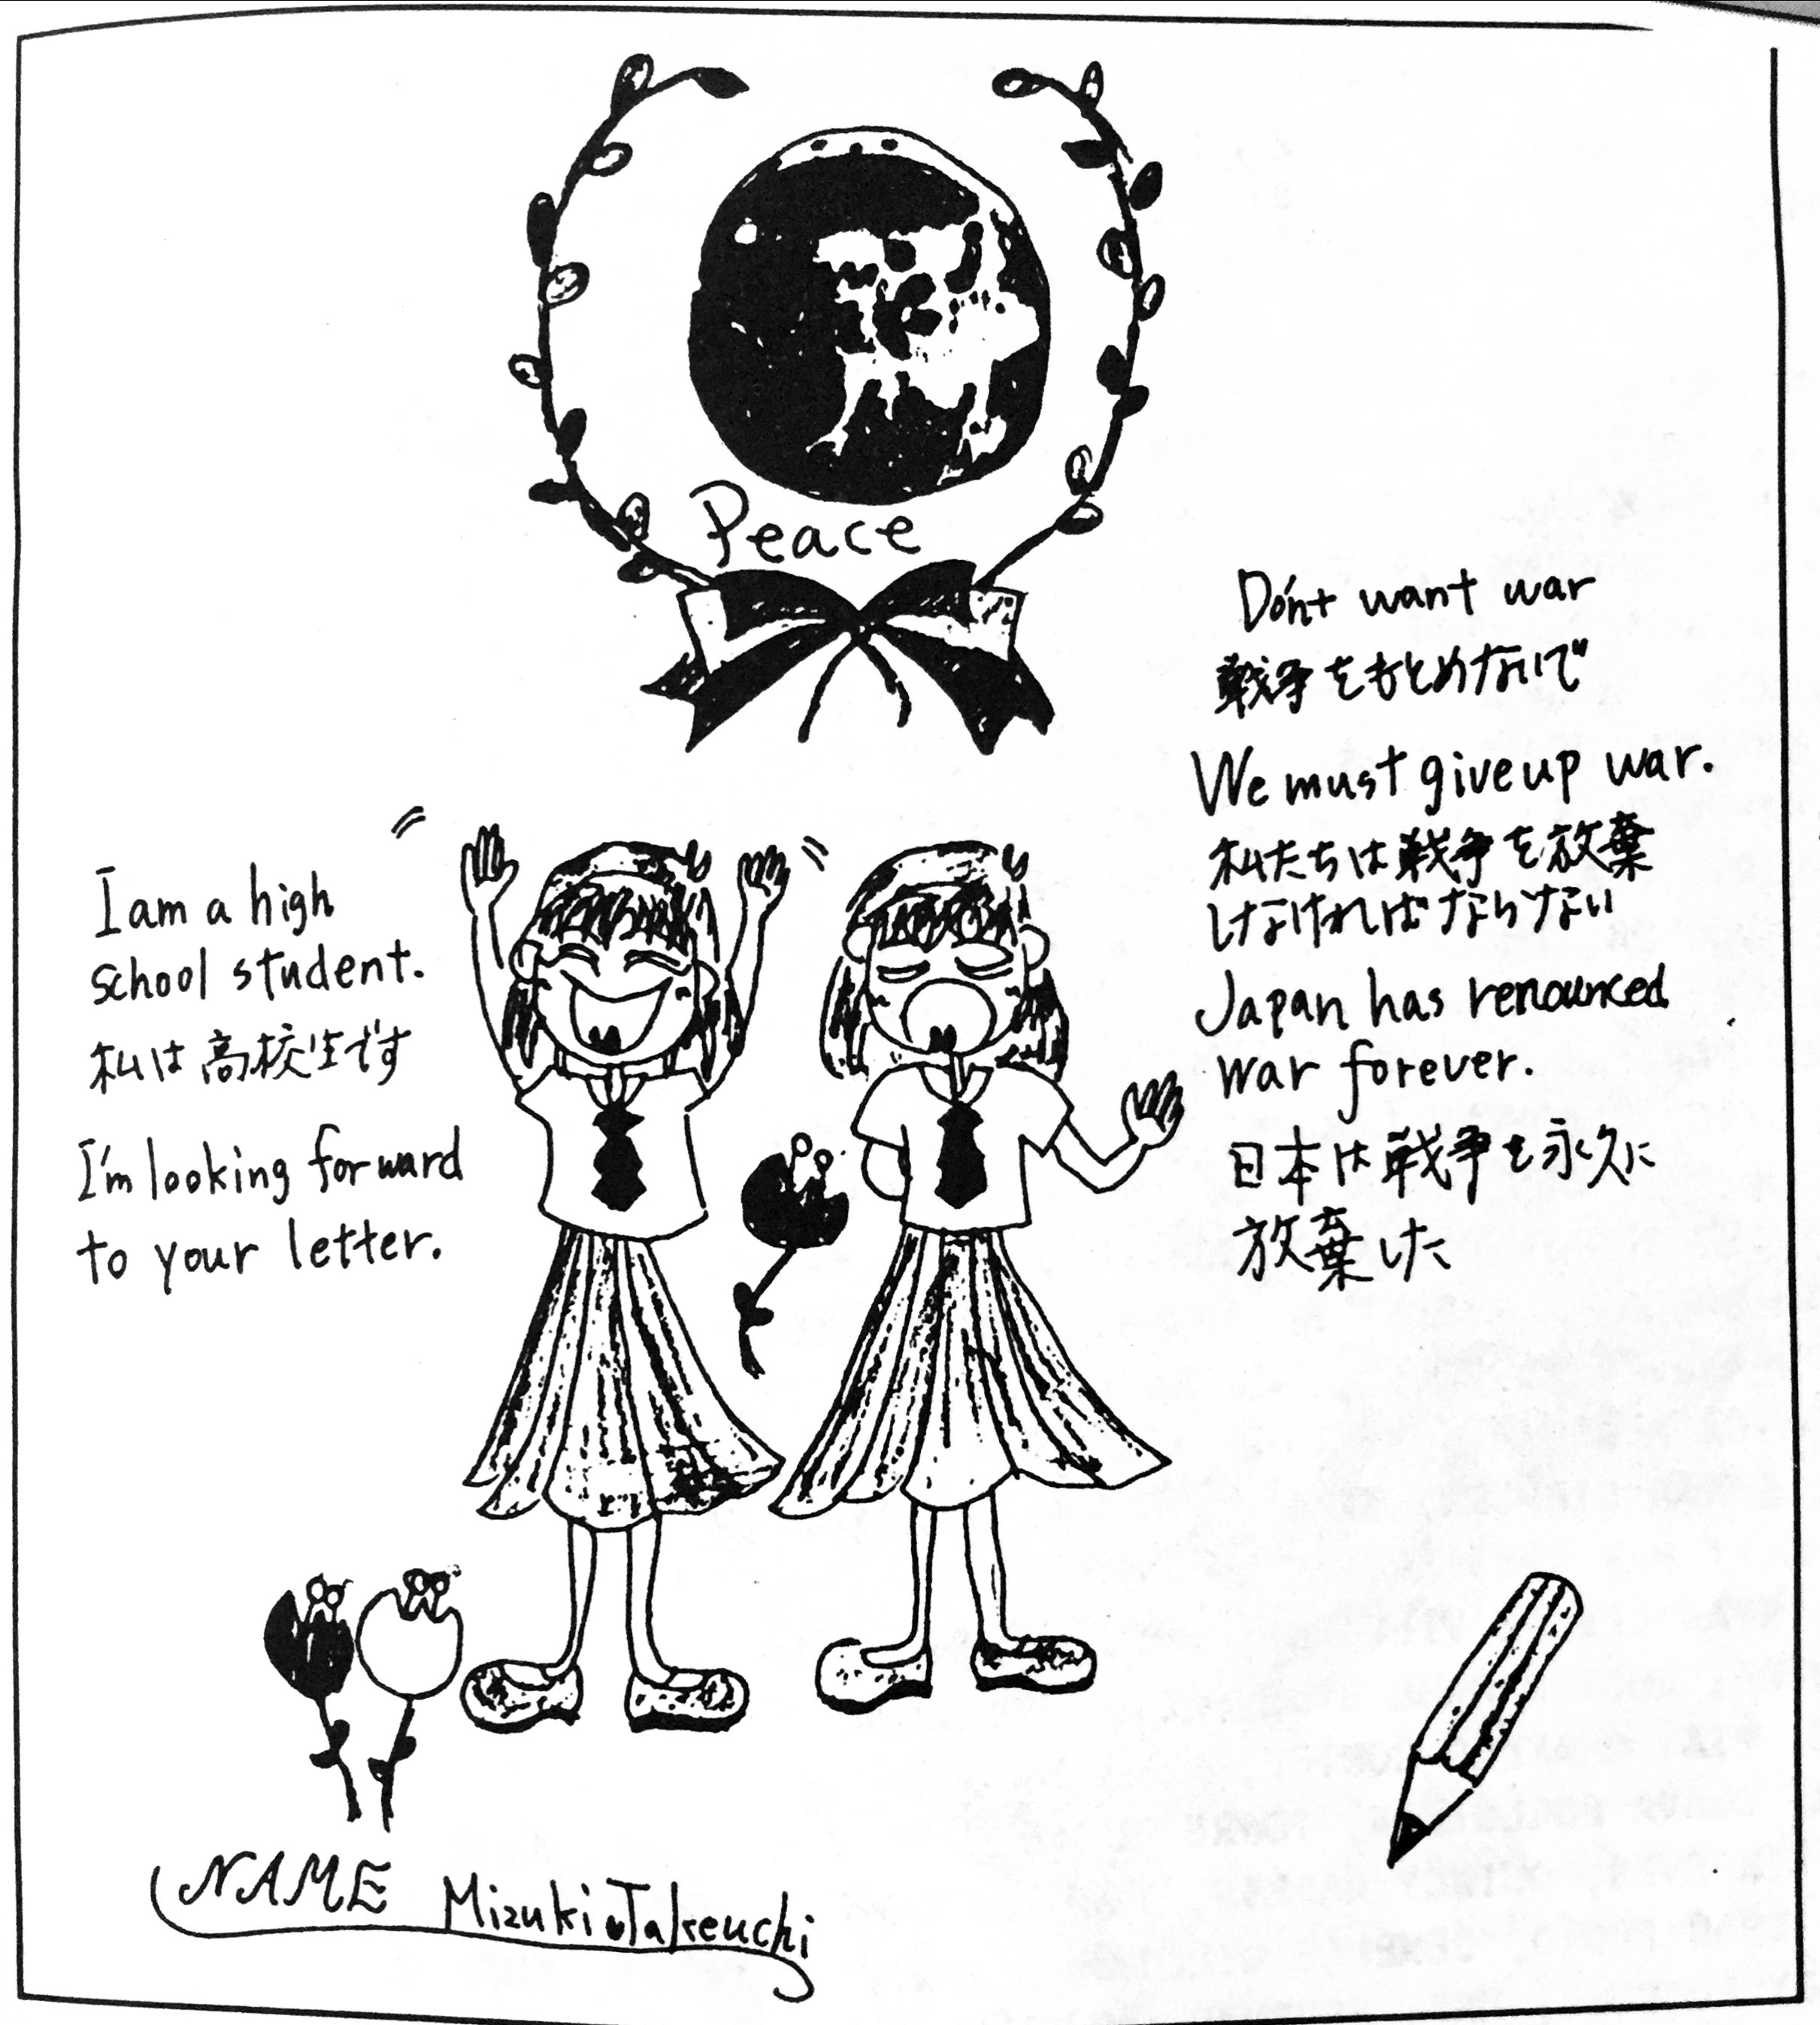 Two girls wave underneath a globe, with text in Japanese and English.